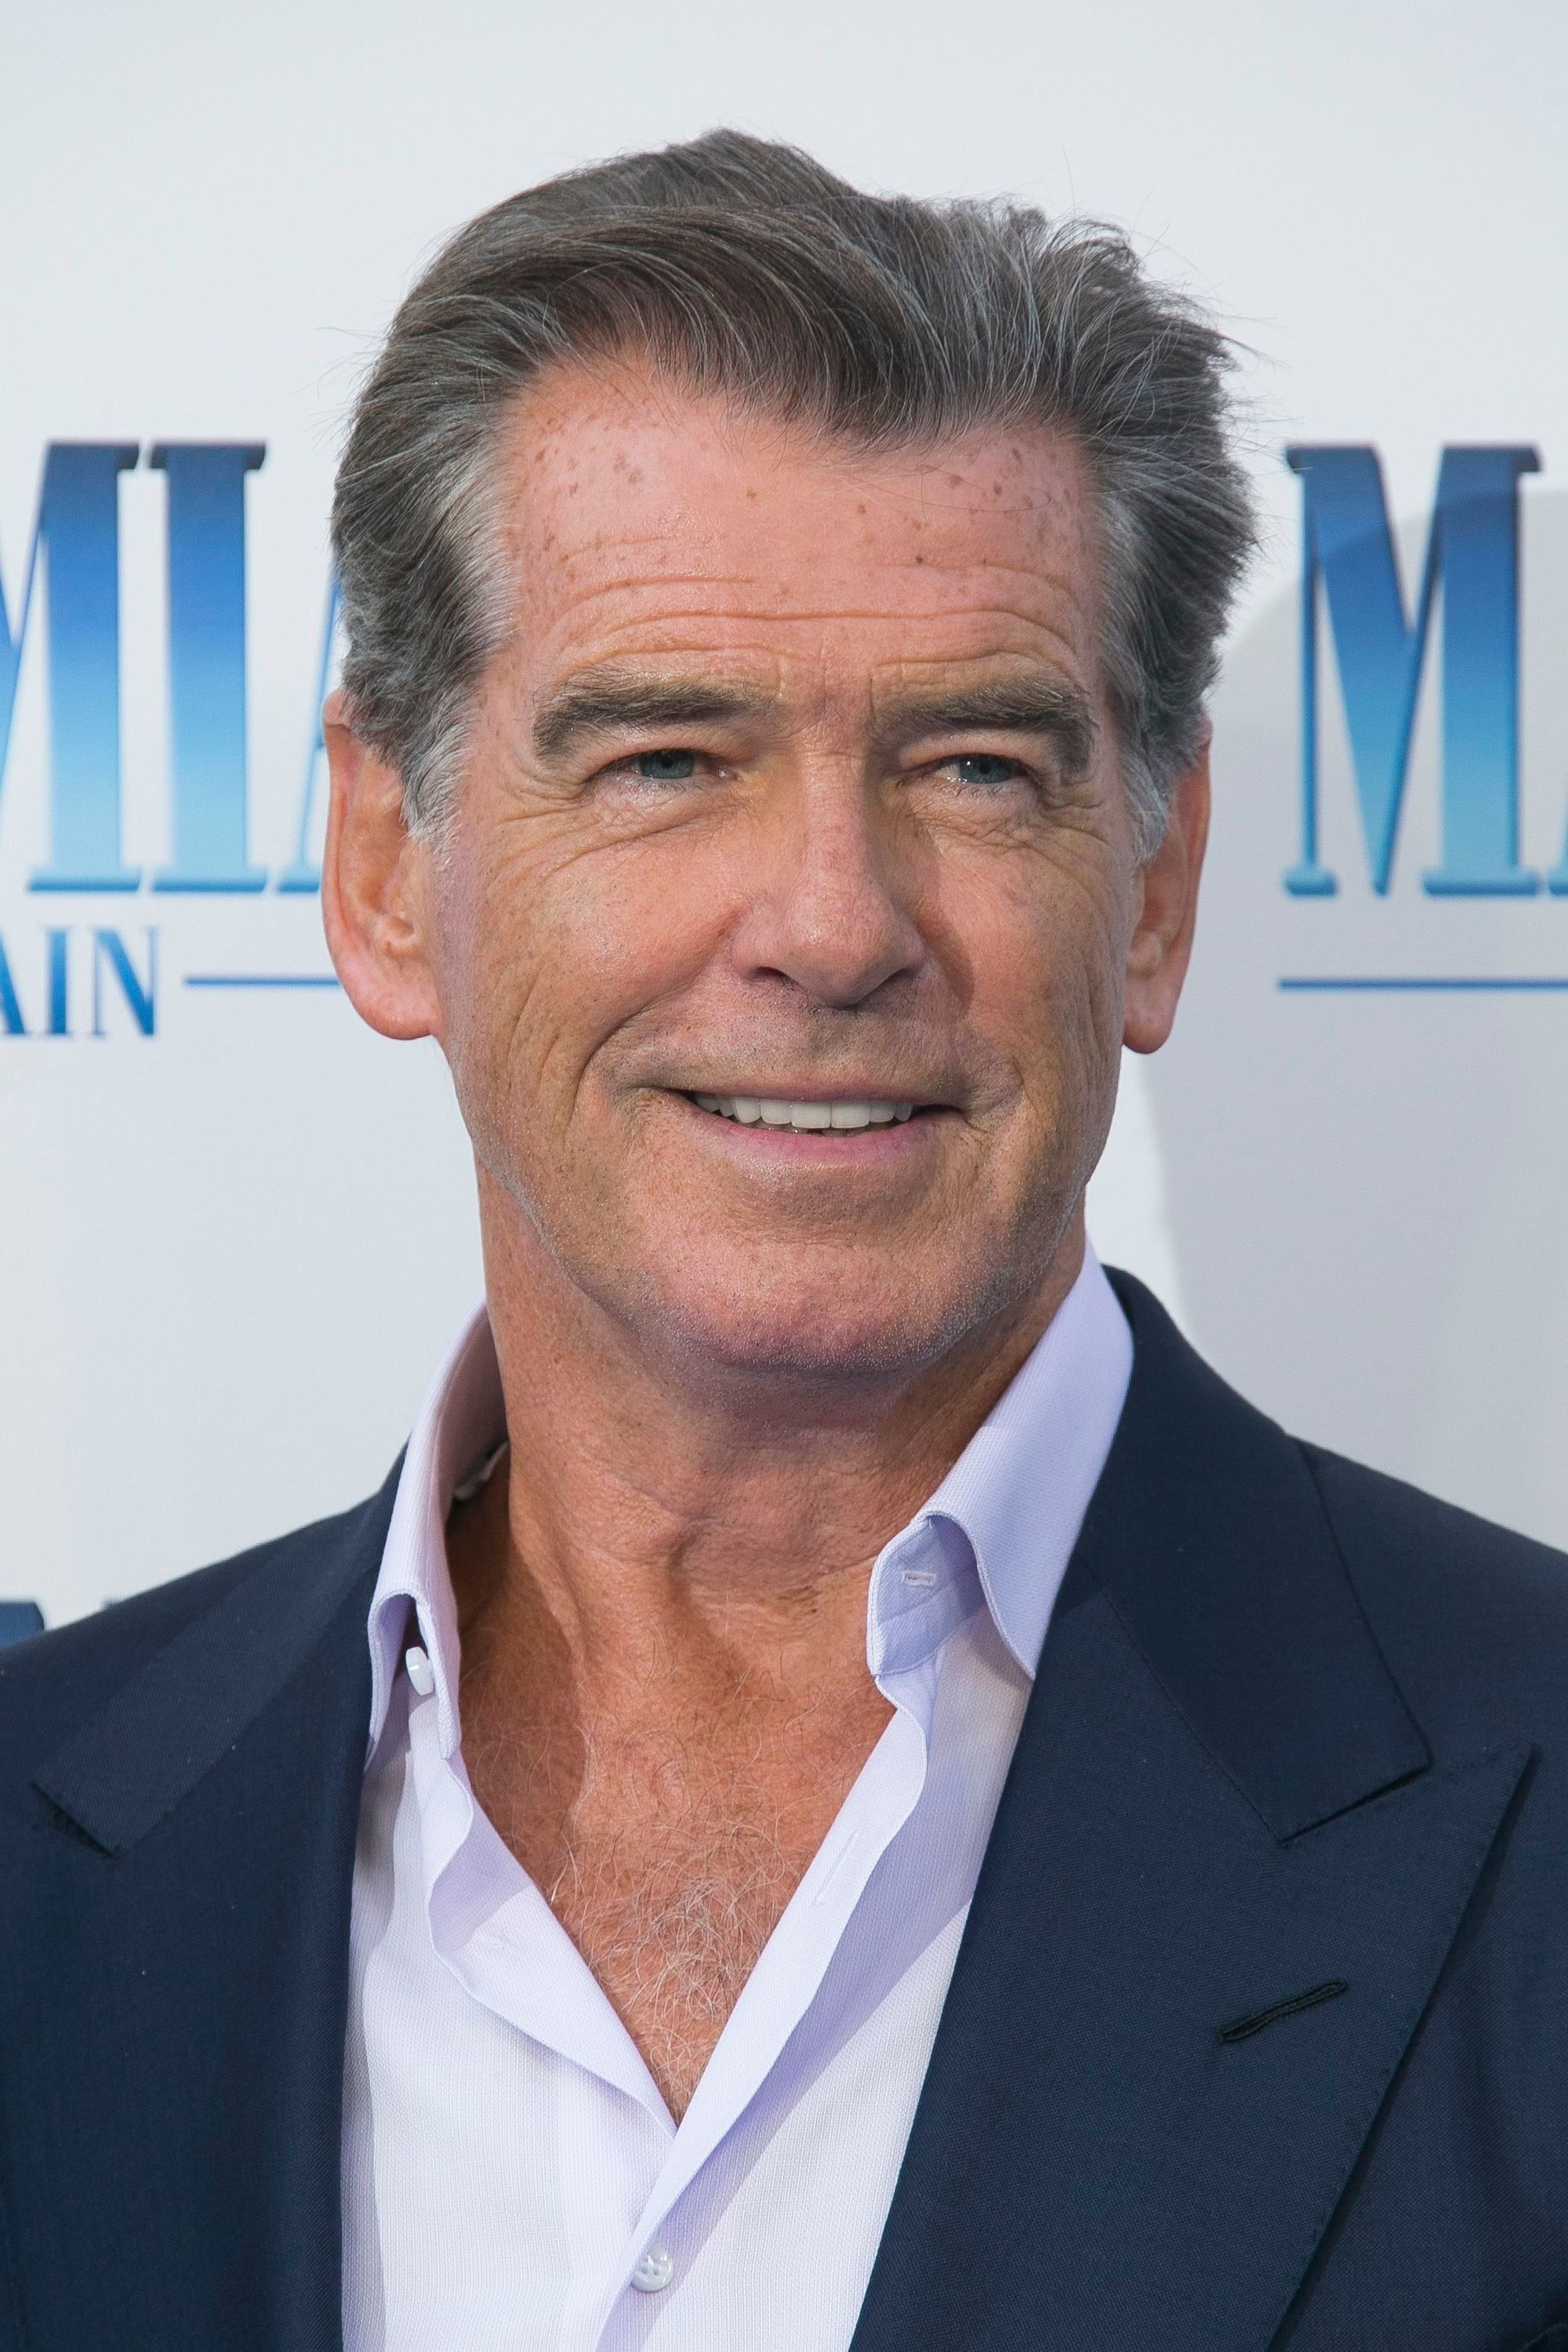 Hairstyles for men over 50: Pierce Brosnan with grey short hair swept back wearing a relaxed blue suit at Mamma Mia premiere.